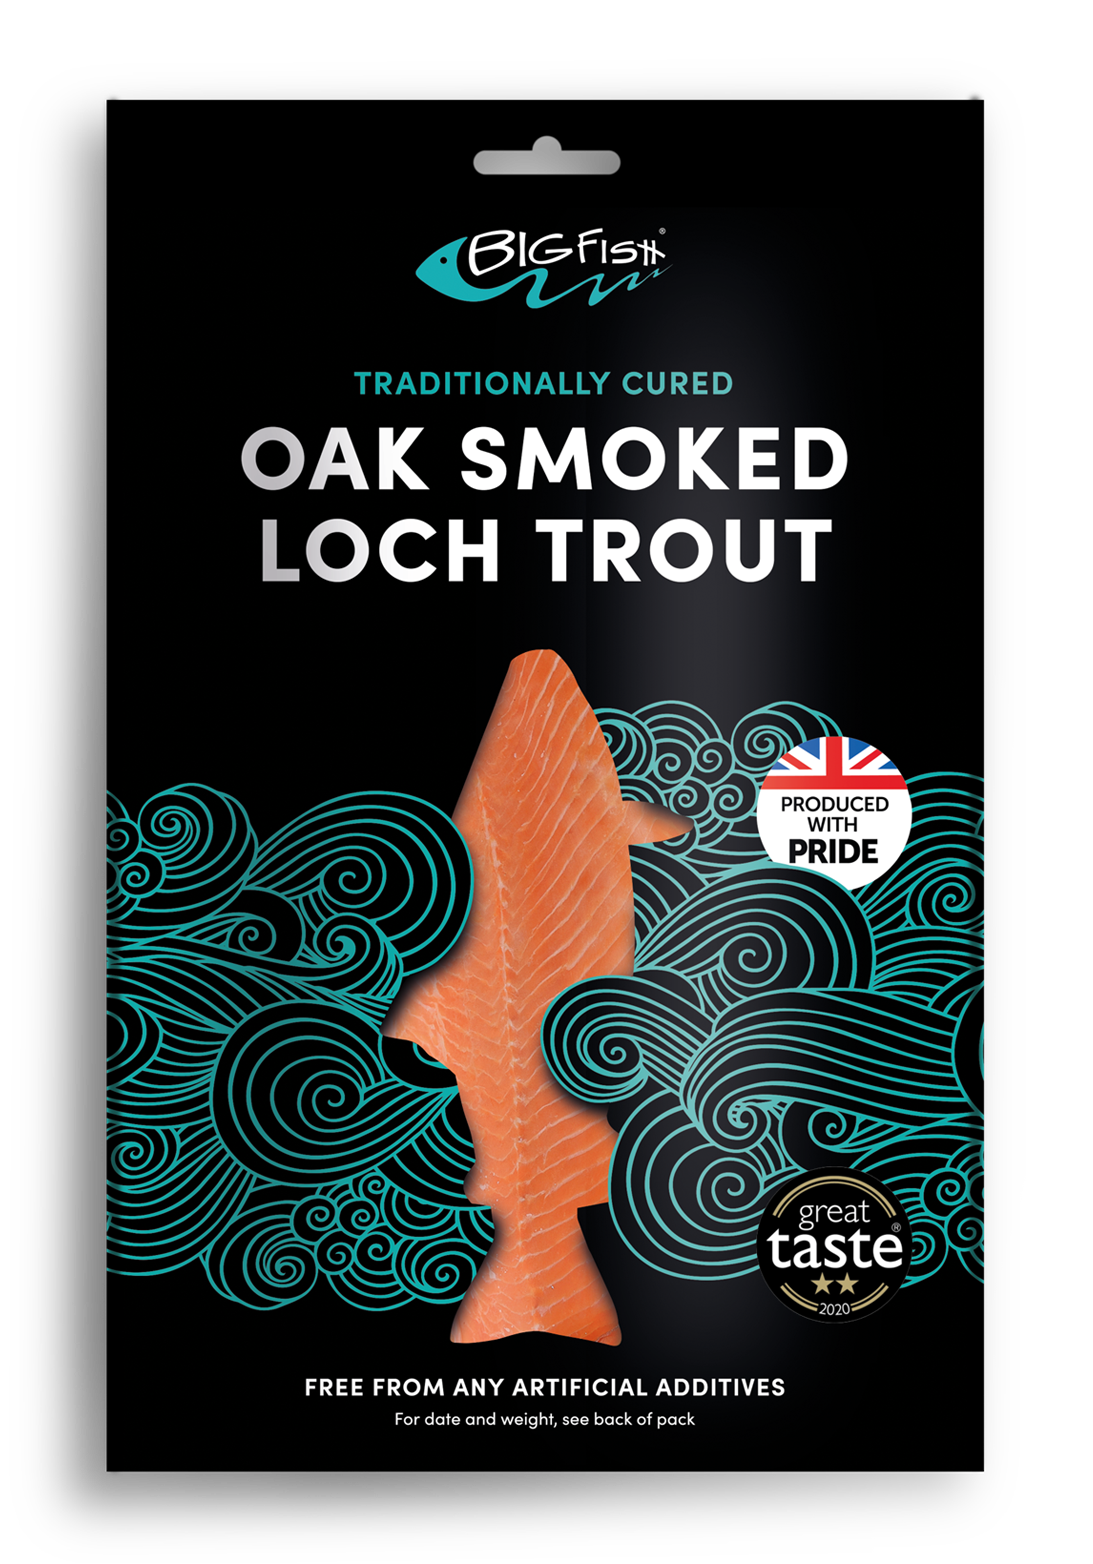 oak-smoked-loch-trout-new.png